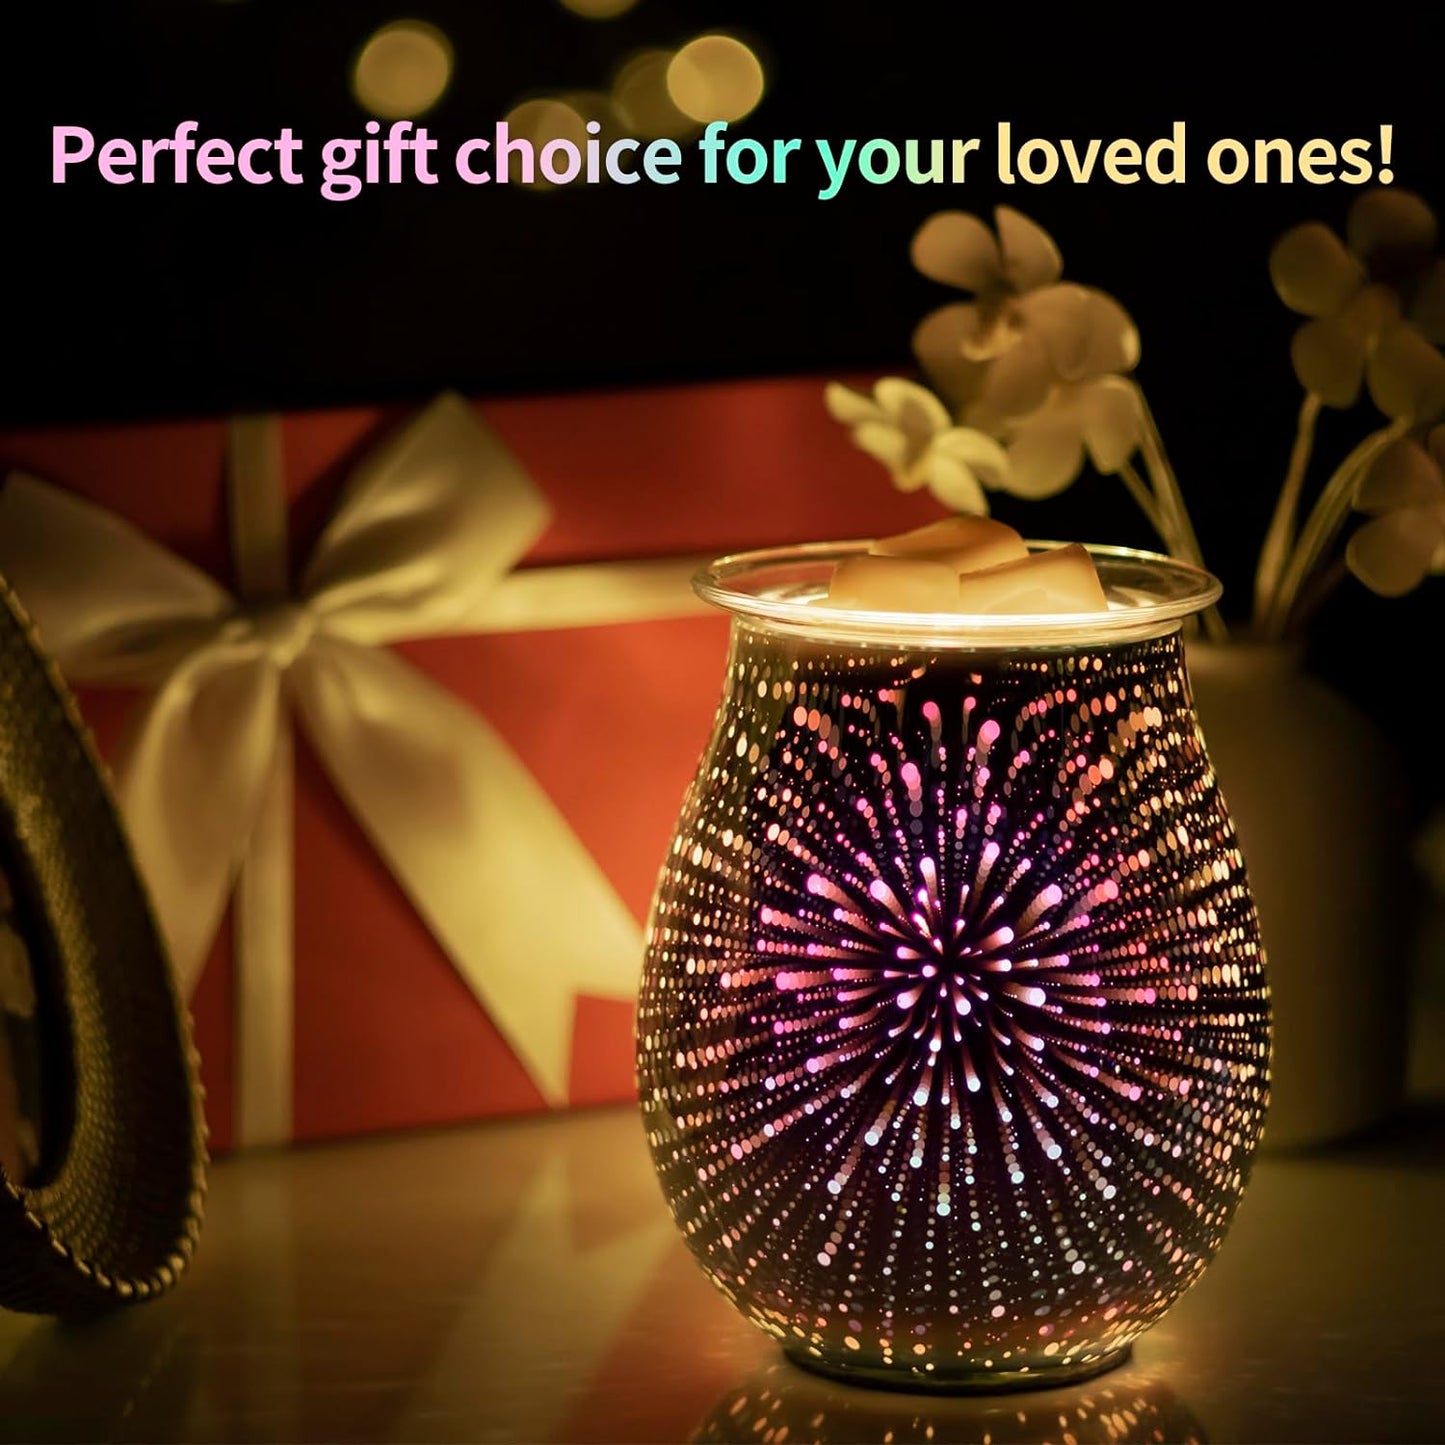 EQUSUPRO Wax Melt Warmer Wax Melter Wax Burner for Scented Wax Electric Fragrance Warmer for Wax Cubes & Tarts, Vivid 3D Design 7 Colors LED Light Gift & Decor for Home Office Studio (Fireworks-PTC)